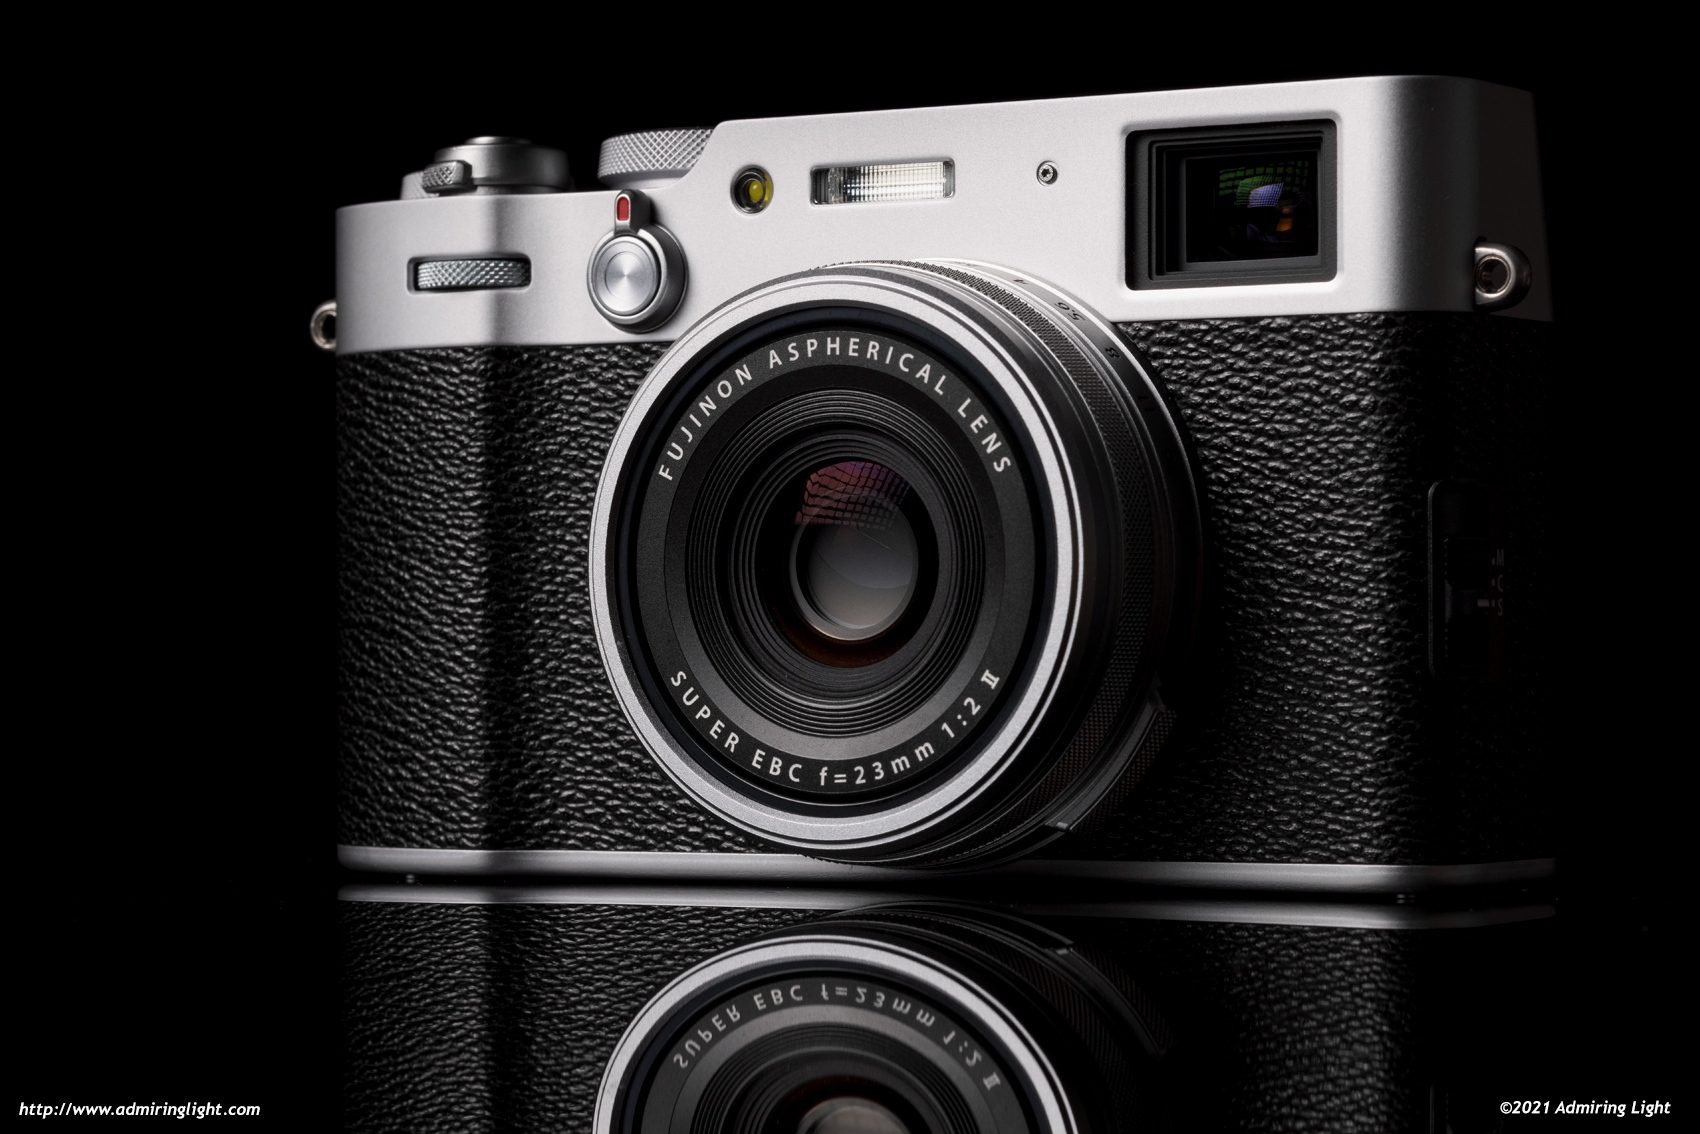 Why Fujifilm Will Have a Hard Time Improving the Almost-Perfect X100V